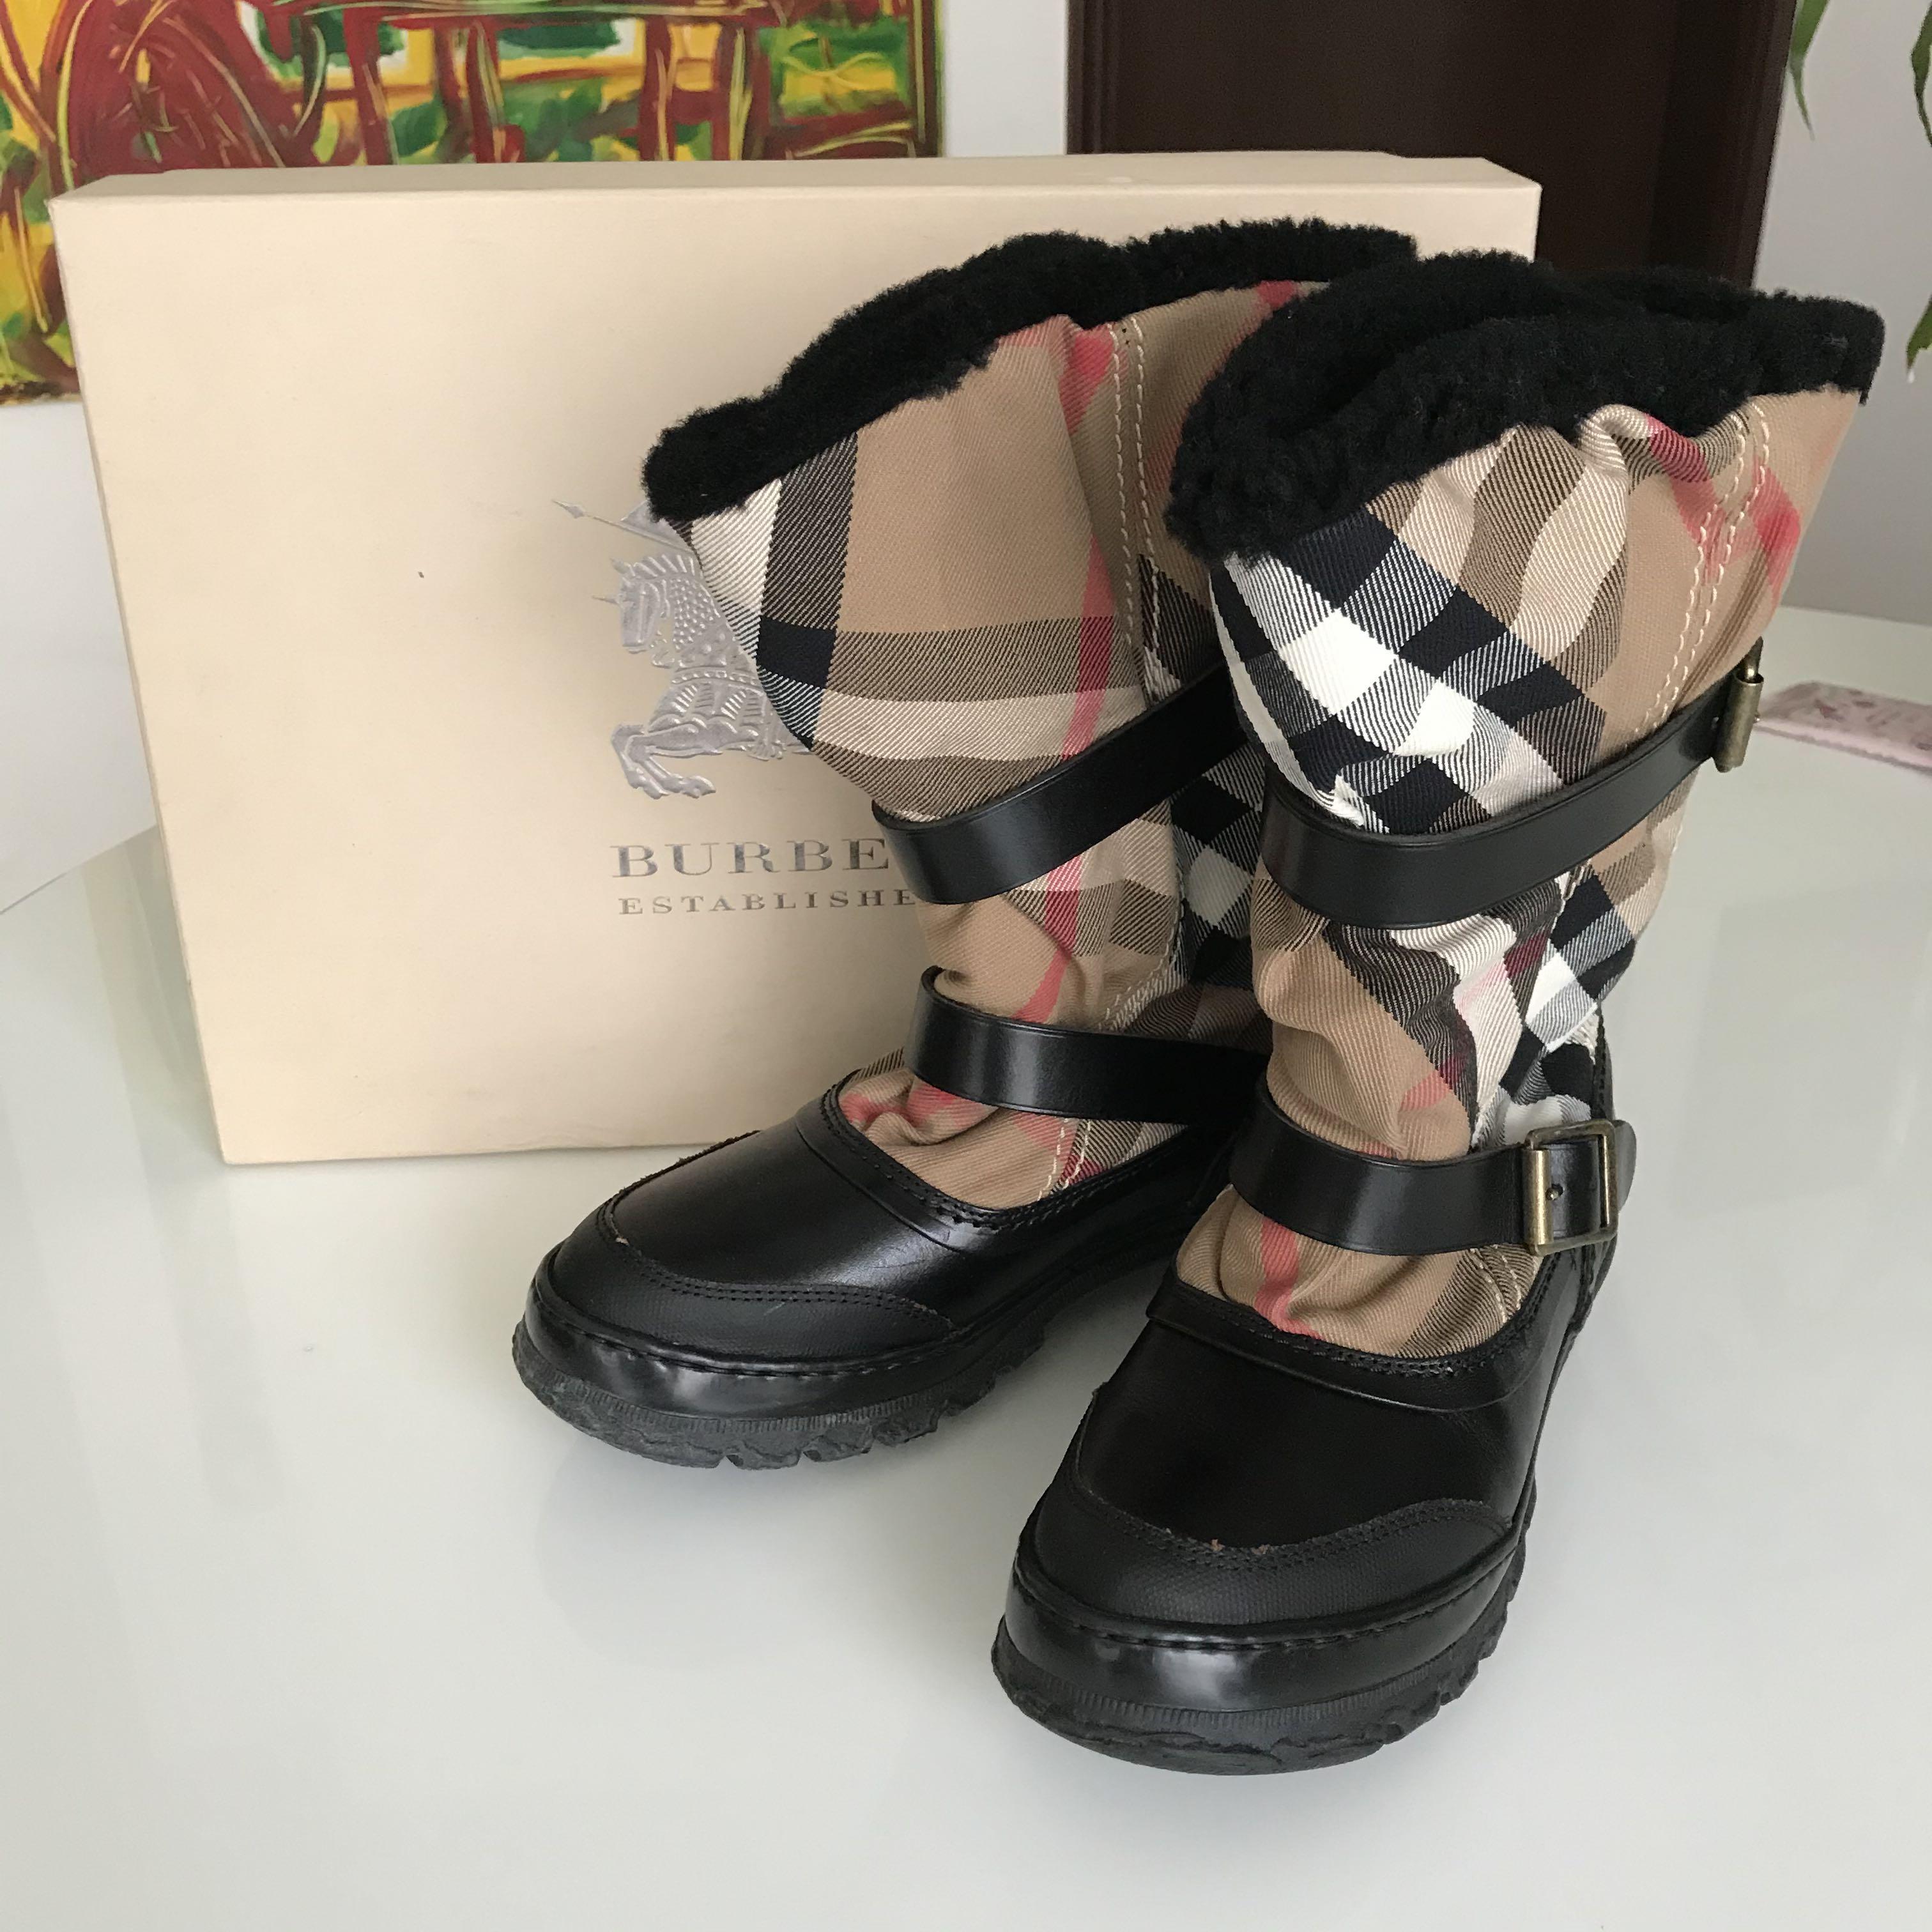 burberry winter shoes